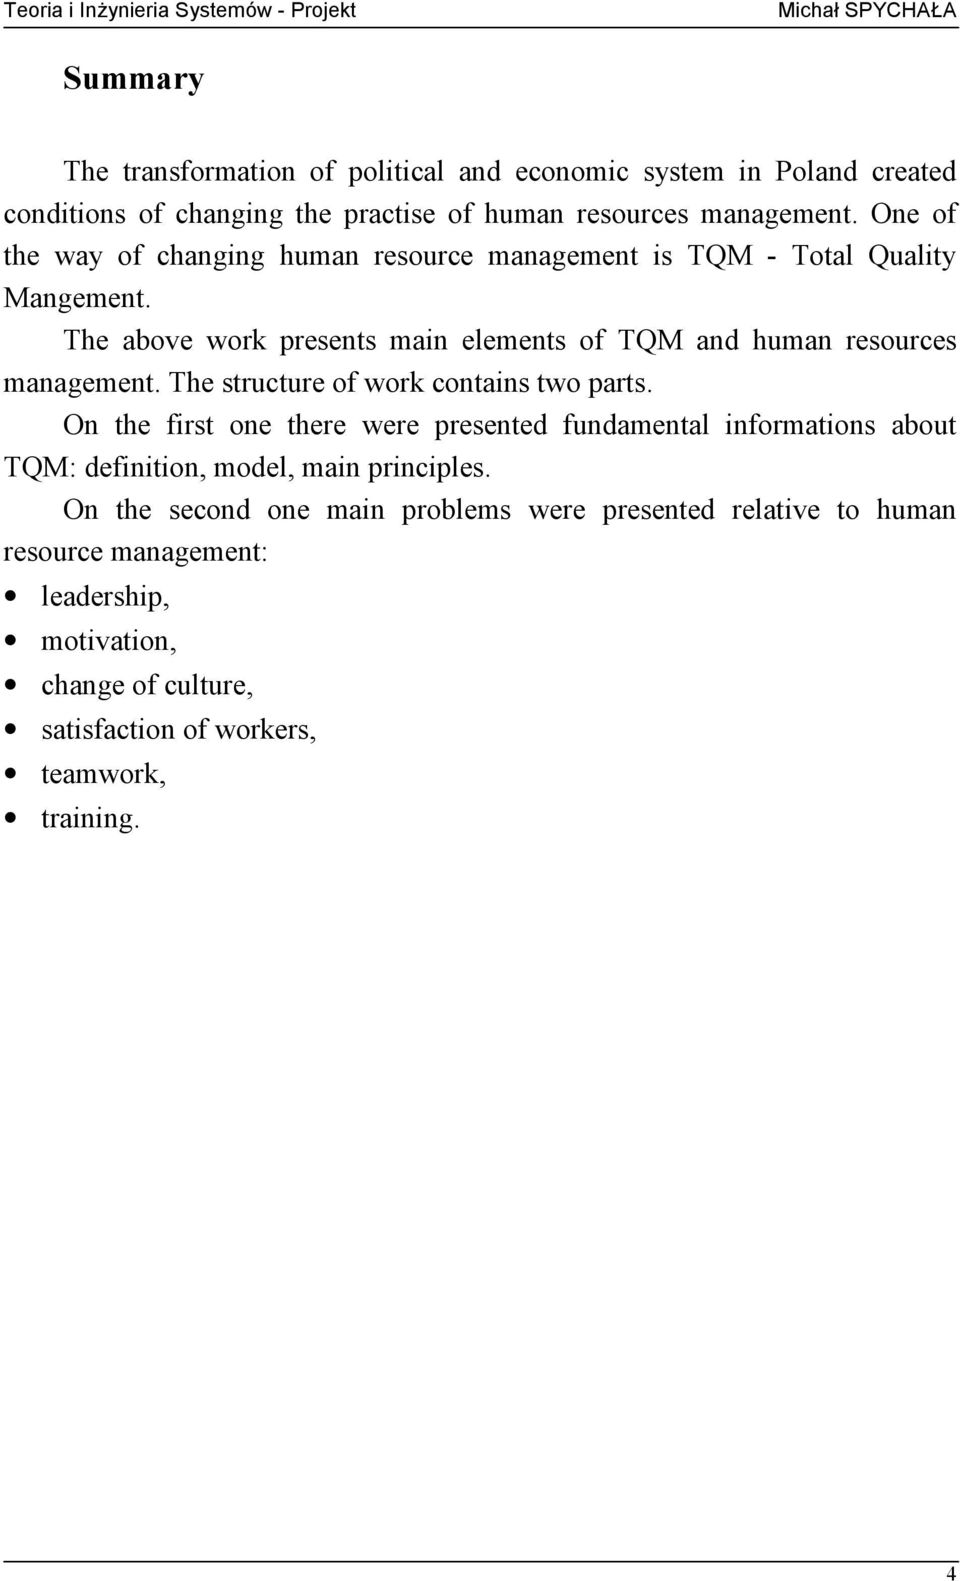 The above work presents main elements of TQM and human resources management. The structure of work contains two parts.